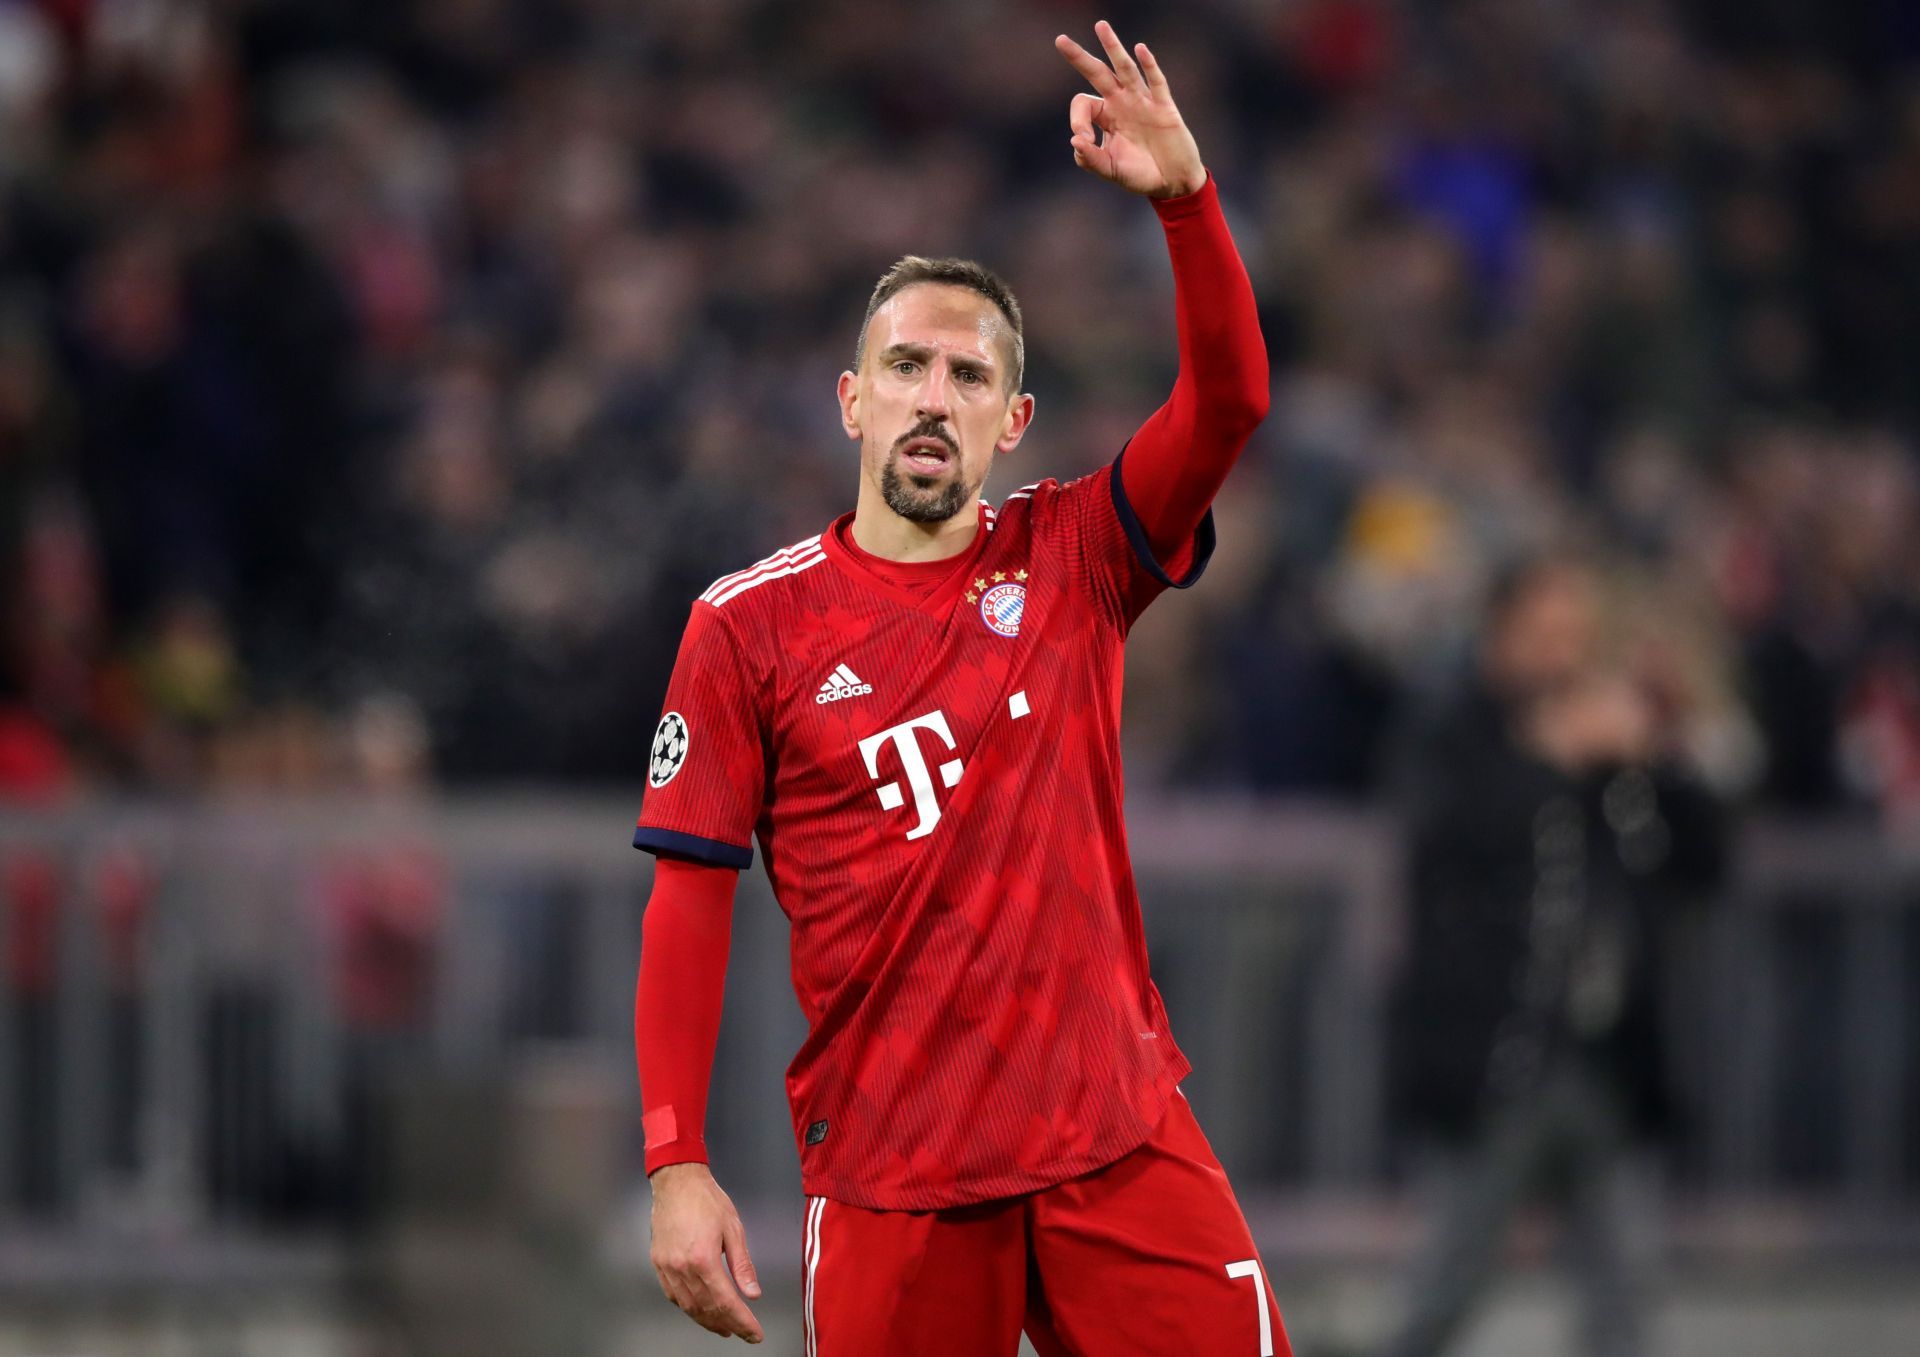 Ribery left Bundesliga as one of the most decorated players in the history of the league